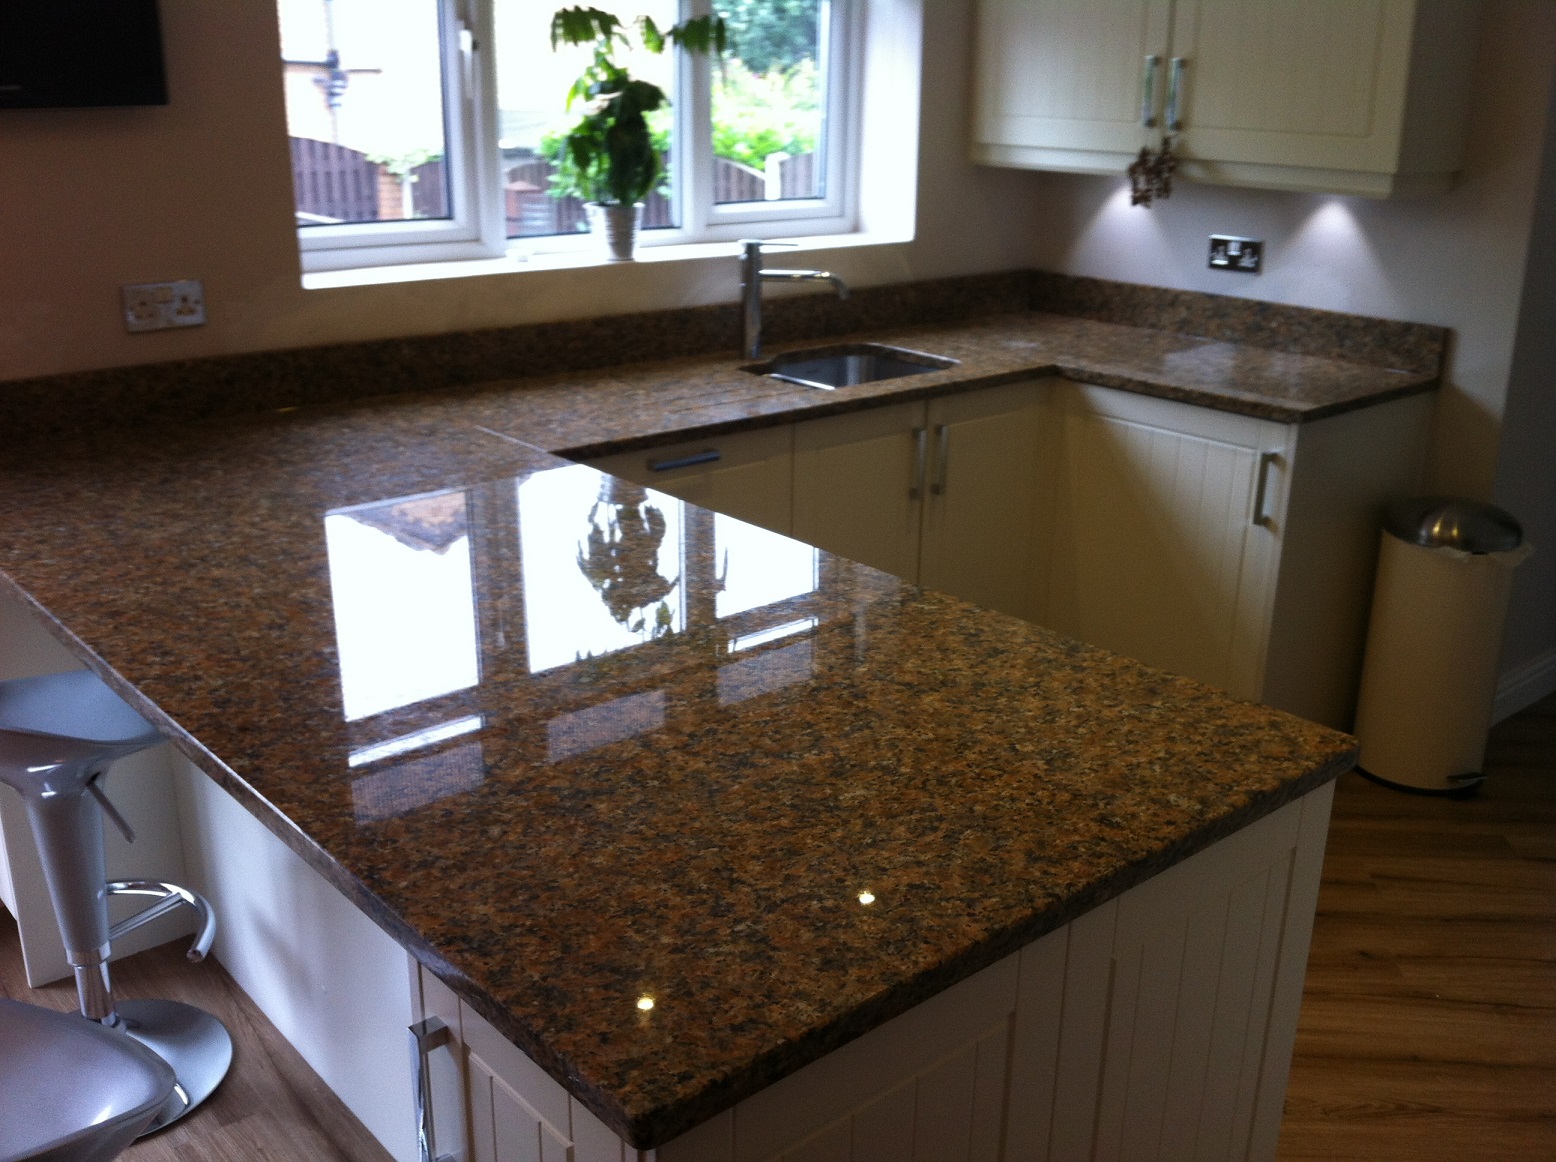 We supply Granite and Quartz Worktops in the basildon Area. We supply Granite and Quartz Worktops in the Wickford Area. We supply Granite and Quartz Worktops in the Rayleigh Area. We supply Granite and Quartz Worktops in the Southend-on-Sea Area. We supply Granite and Quartz Worktops in the Canvey-Island Area. We supply Granite and Quartz Worktops in the Corringham Area. We supply Granite and Quartz Worktops in the Grays Area. We supply Granite and Quartz Worktops in the Brentwood Area. We supply Granite and Quartz Worktops in the Romford Area. We supply Granite and Quartz Worktops in the Dagenham Area. We supply Granite and Quartz Worktops in the Billericay Area. We supply Granite and Quartz Worktops in the Shoeburyness Area. We supply Granite and Quartz Worktops in the South-Benfleet Area. We supply Granite and Quartz Worktops in the Rawreth Area. We supply Granite and Quartz Worktops in the Battlesbridge Area. We supply Granite and Quartz Worktops in the Rochford Area. We supply Granite and Quartz Worktops in the Hockley Area. We supply Granite and Quartz Worktops in the Hadleigh Area. We supply Granite and Quartz Worktops in the Orsett Area. We supply Granite and Quartz Worktops in the Hornchurch Area. We supply Granite and Quartz Worktops in the town20 Area.